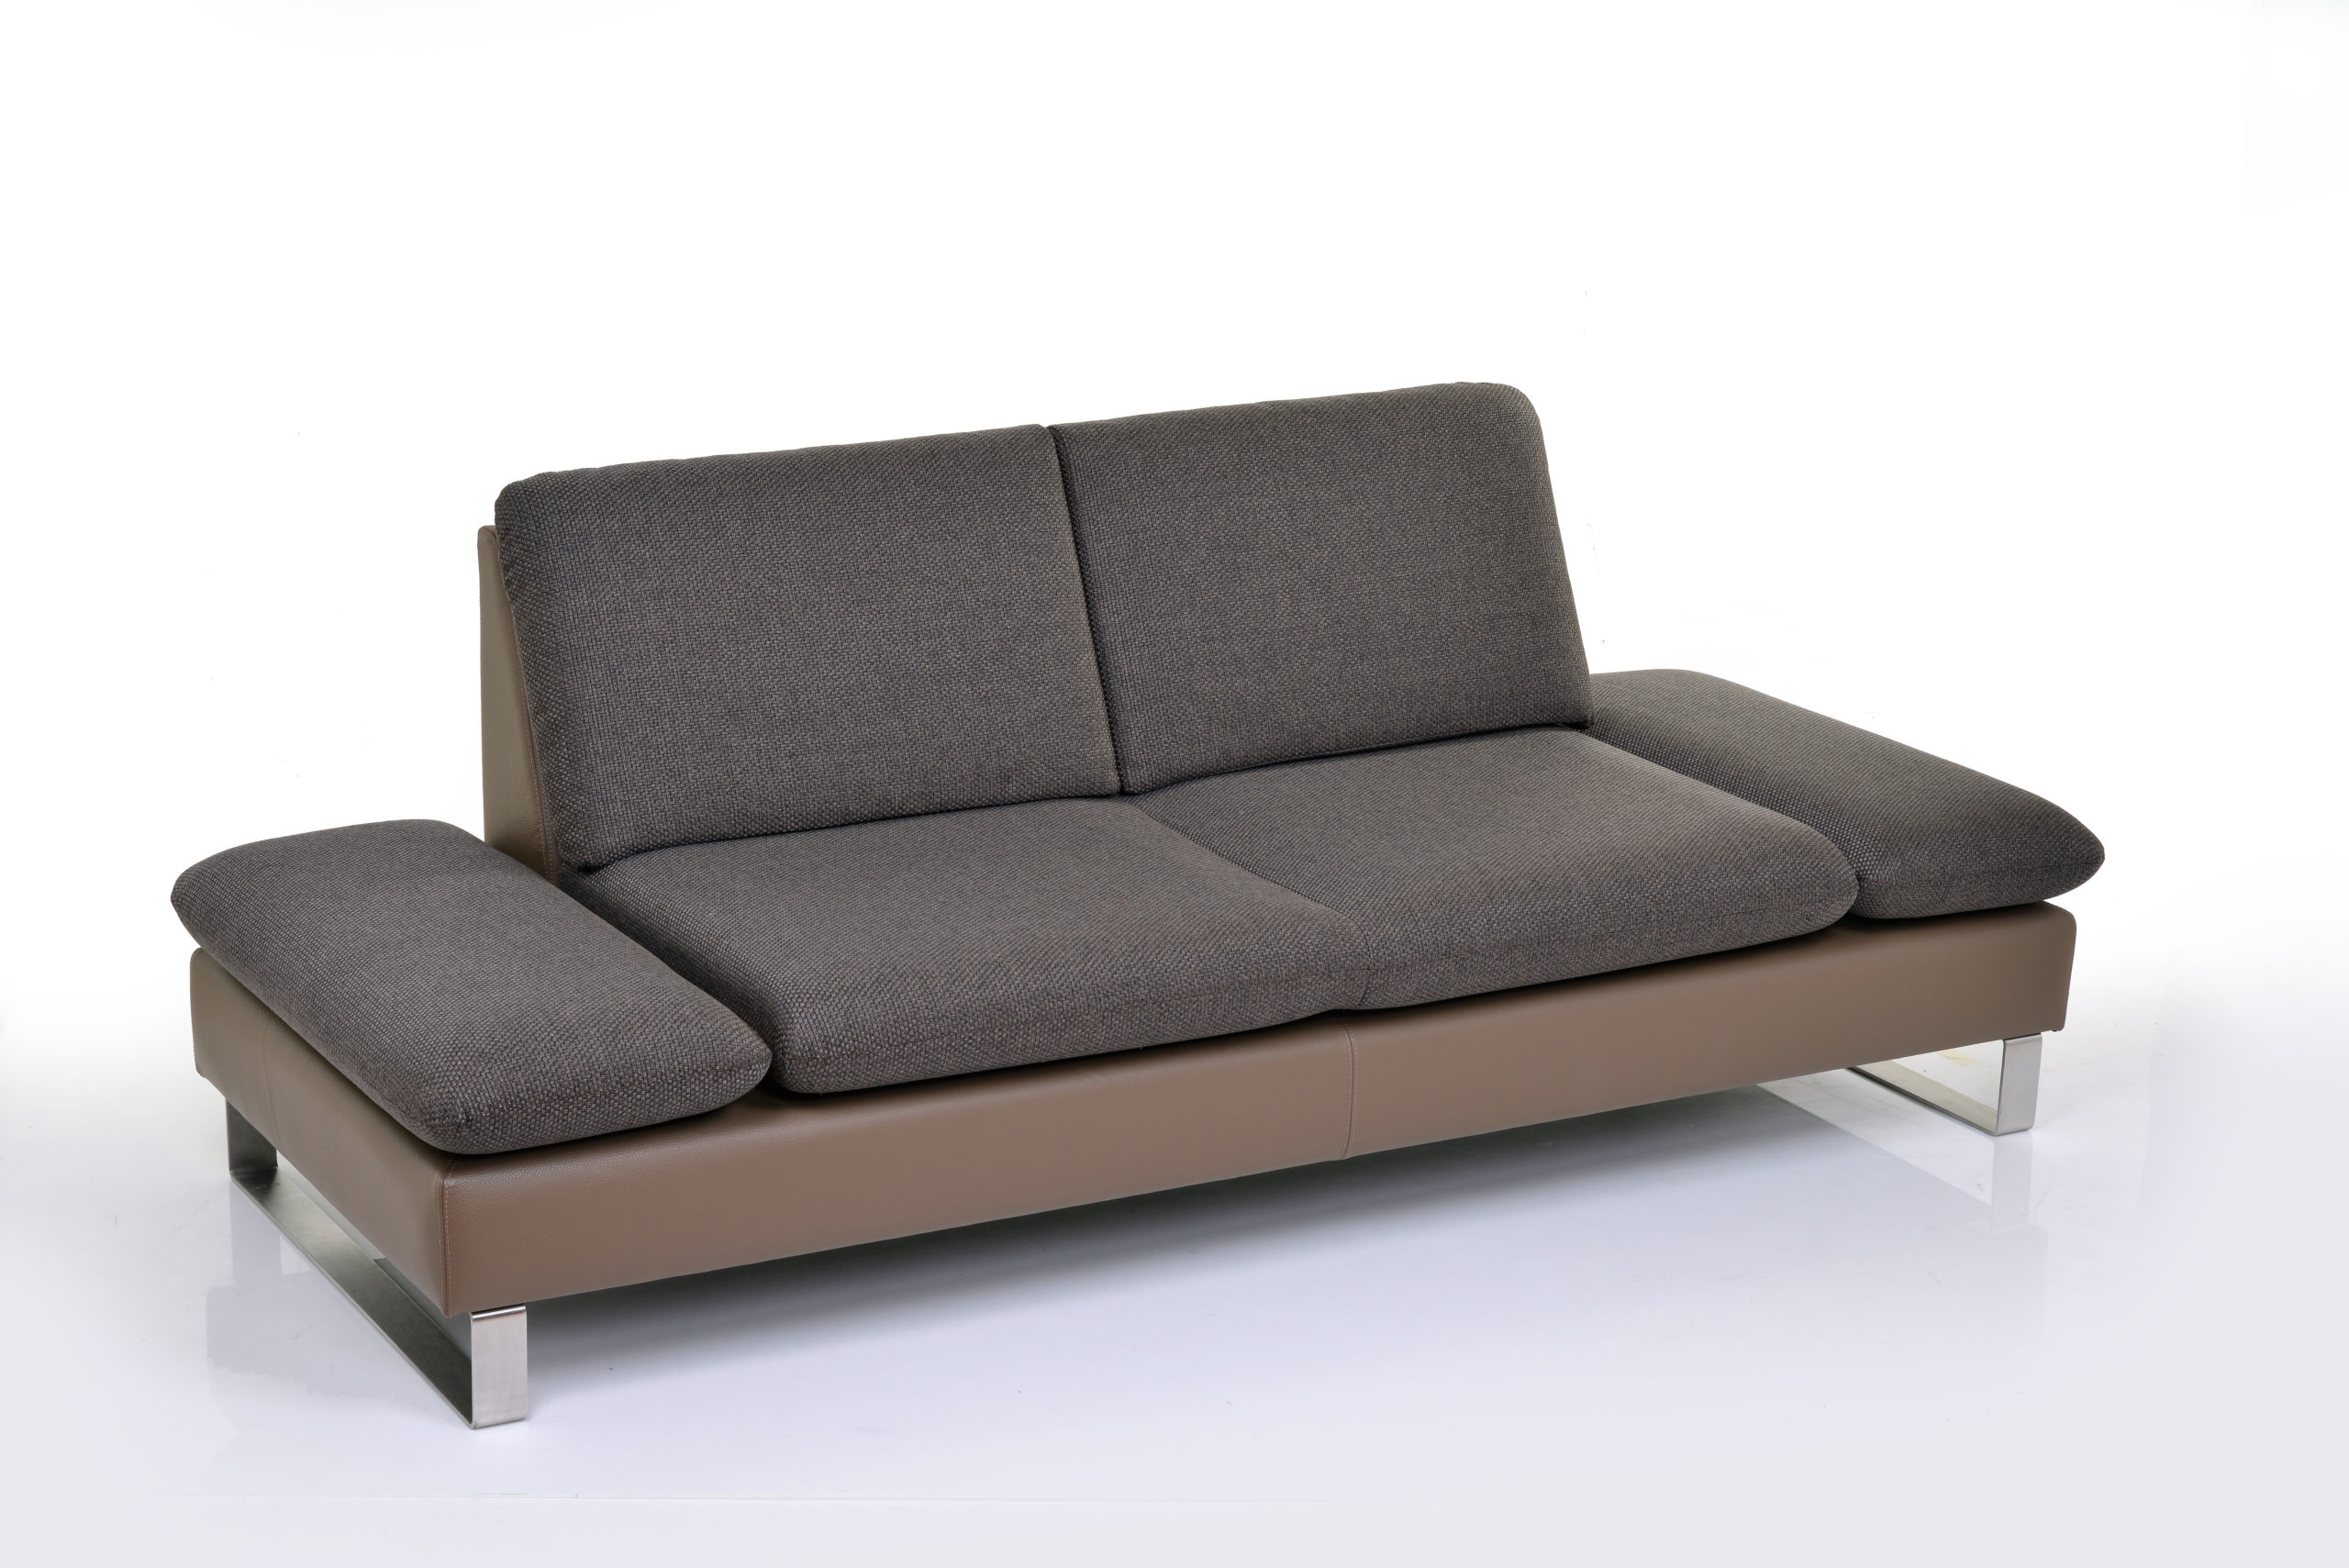 Designersofa Couch "Dolly"